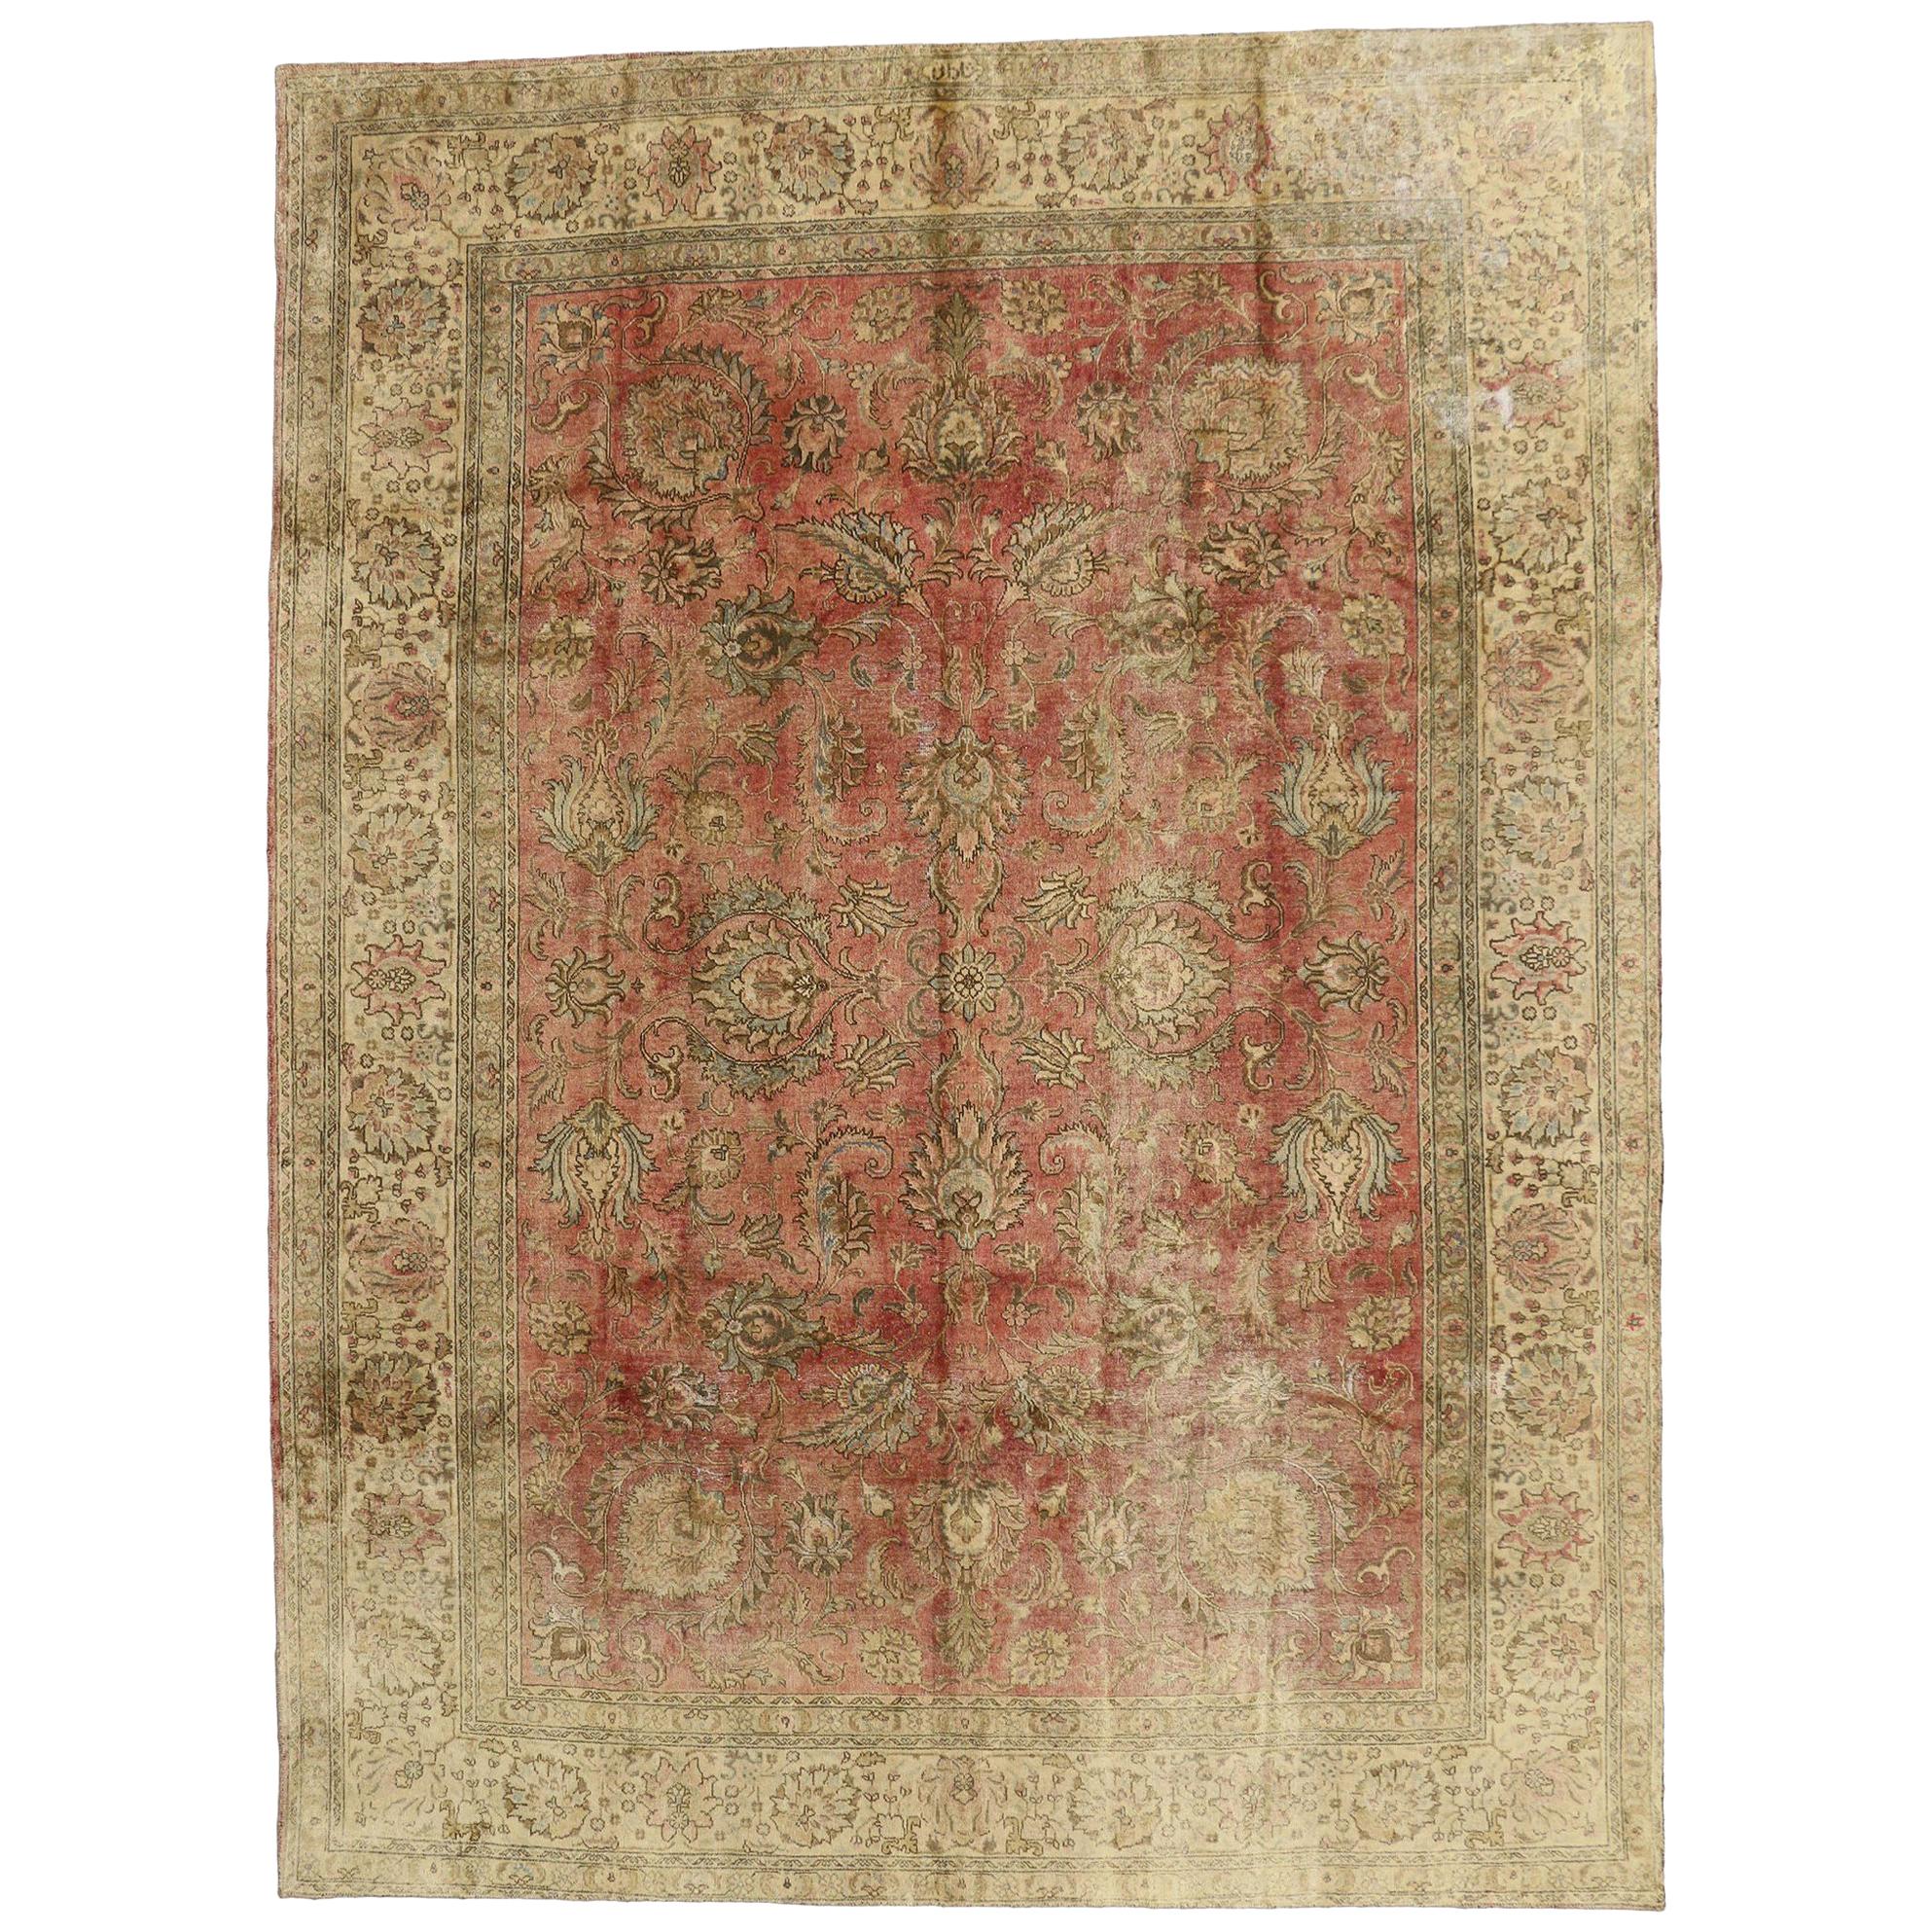 Distressed Antique Persian Tabriz Rug Industrial Rustic Style For Sale